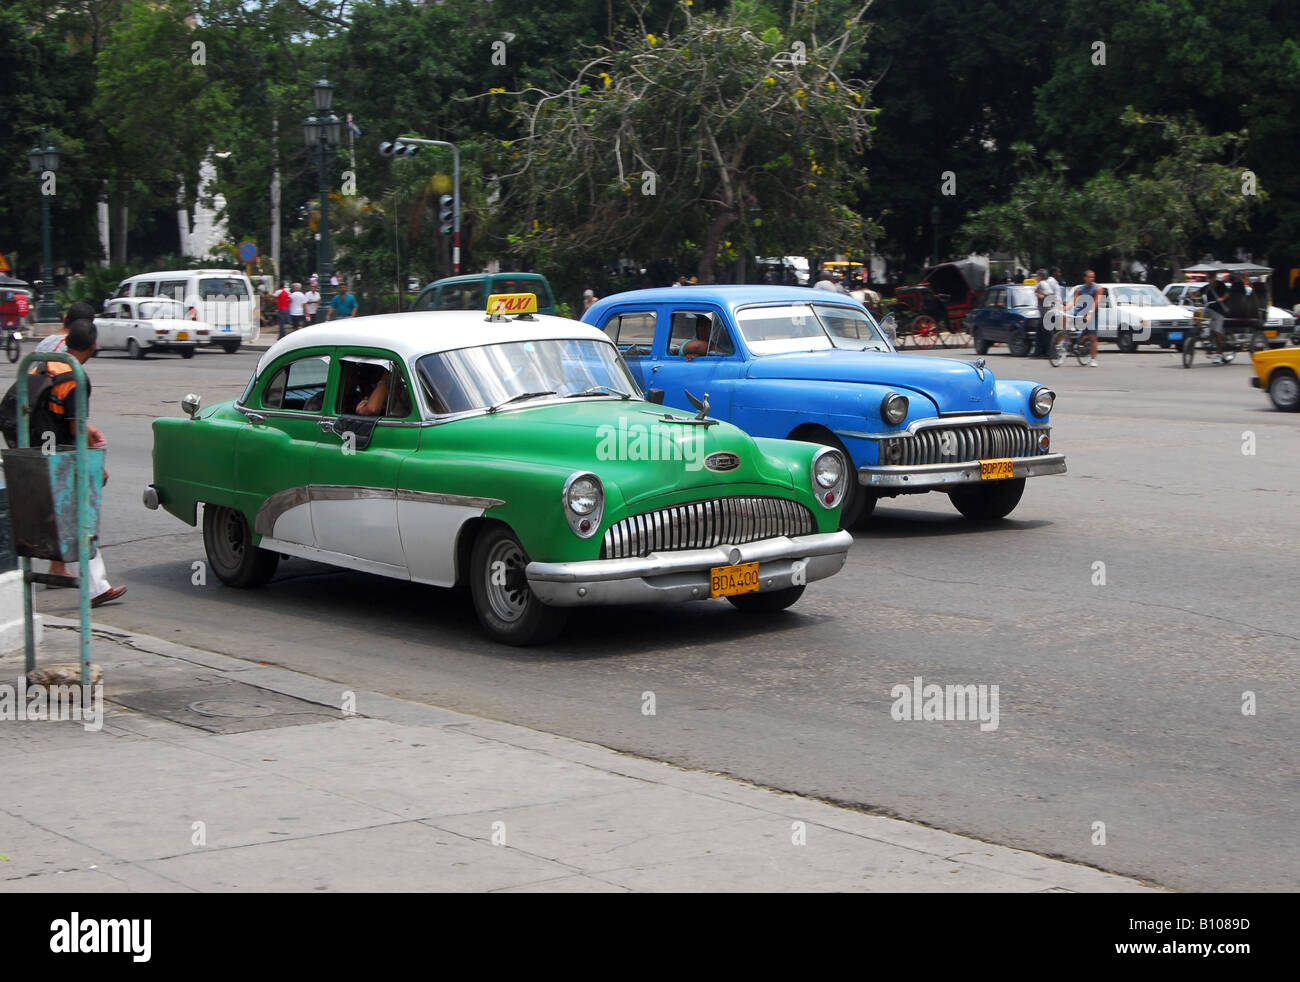 Buick and Dodge classic American cars in Parque Central, the main square in Havana's Old Town Stock Photo